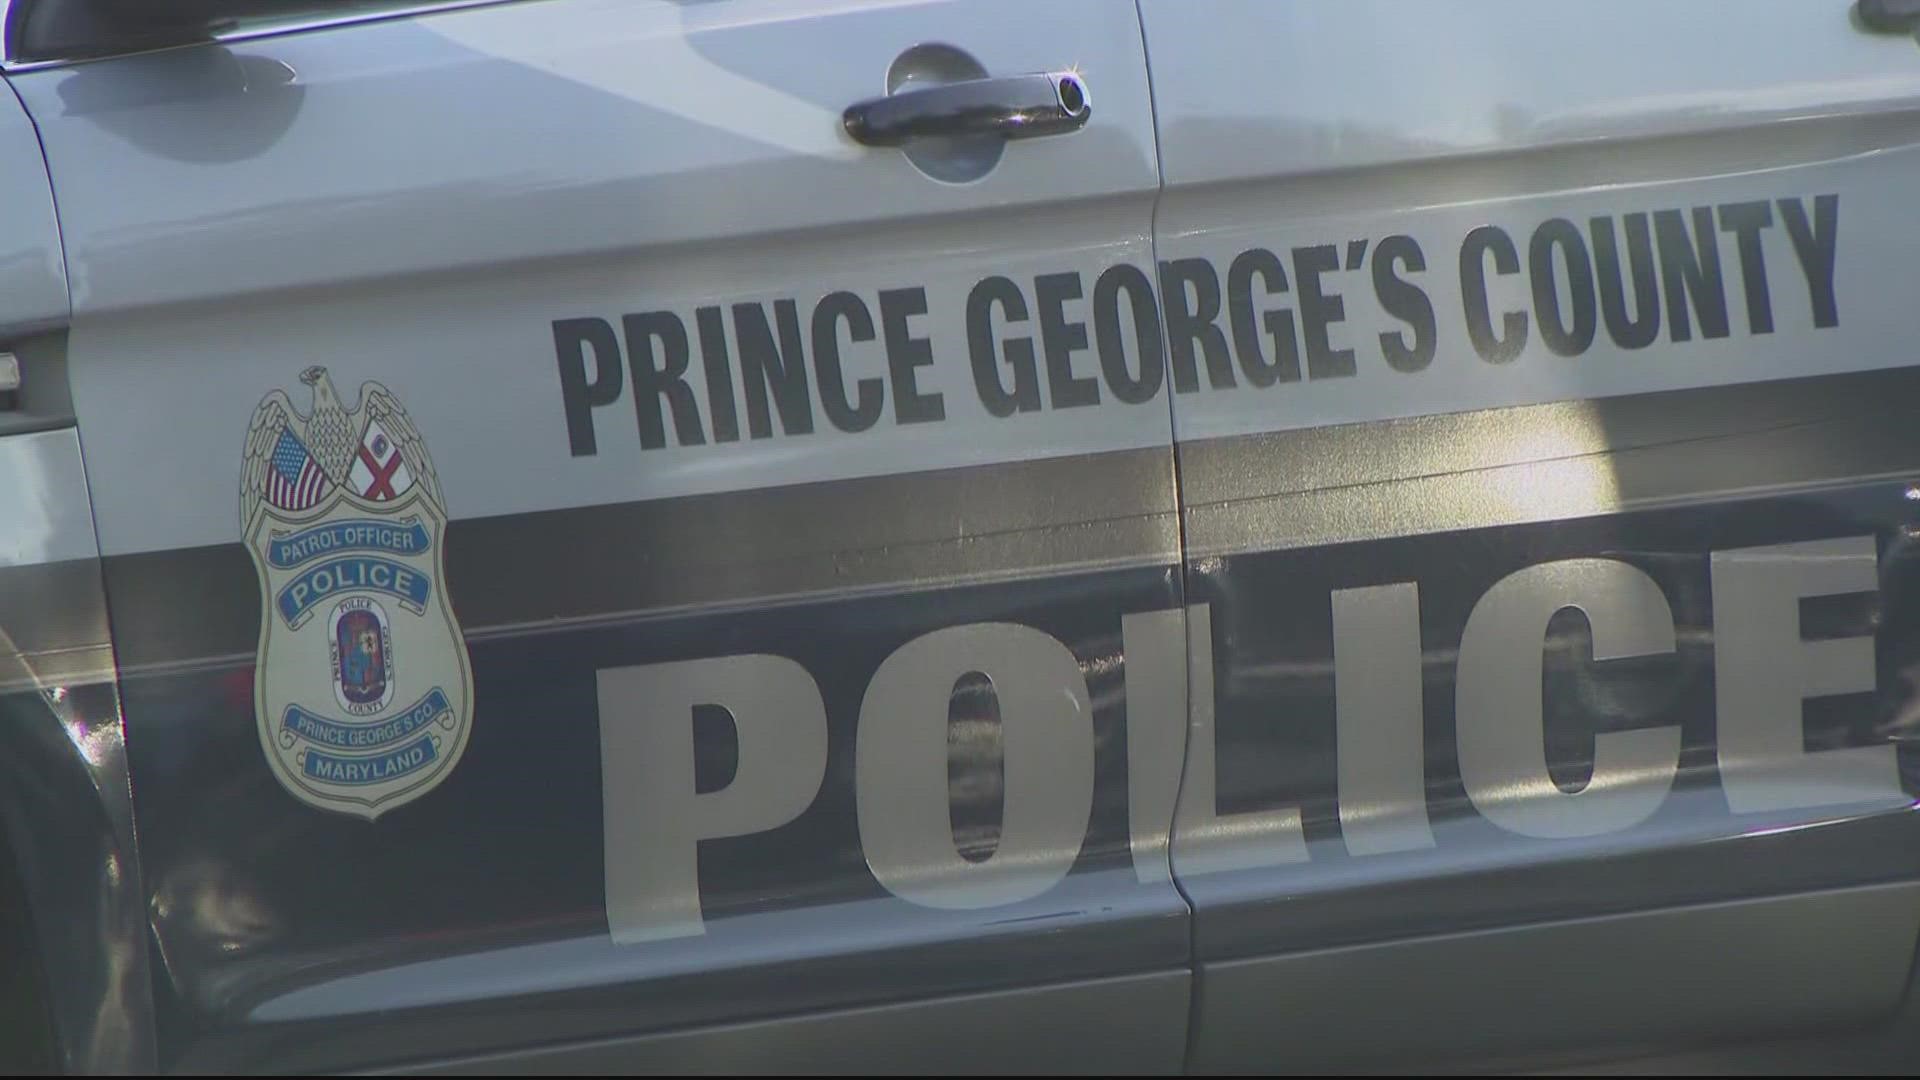 Two homicide investigations are underway in Prince George's County after two separate incidents were reported hours apart on Sunday.